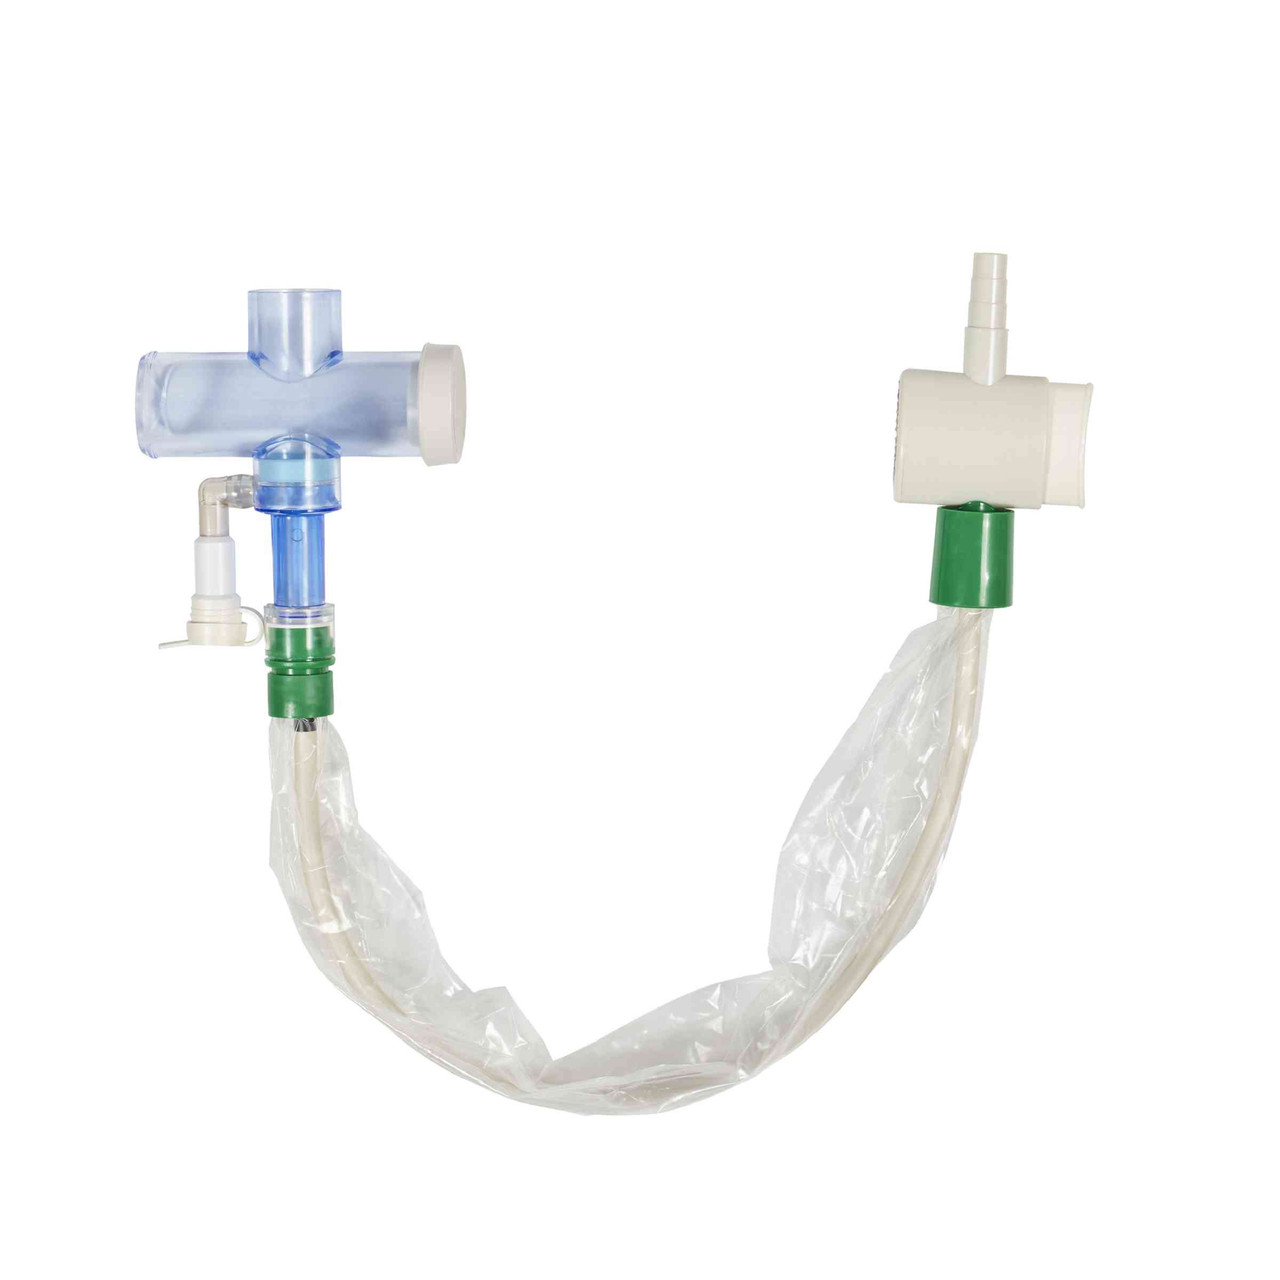 Avanos Closed Suction System, Adult, Turbo Cleaning, 14FR, T-Piece, Endotracheal Length, 20/cs